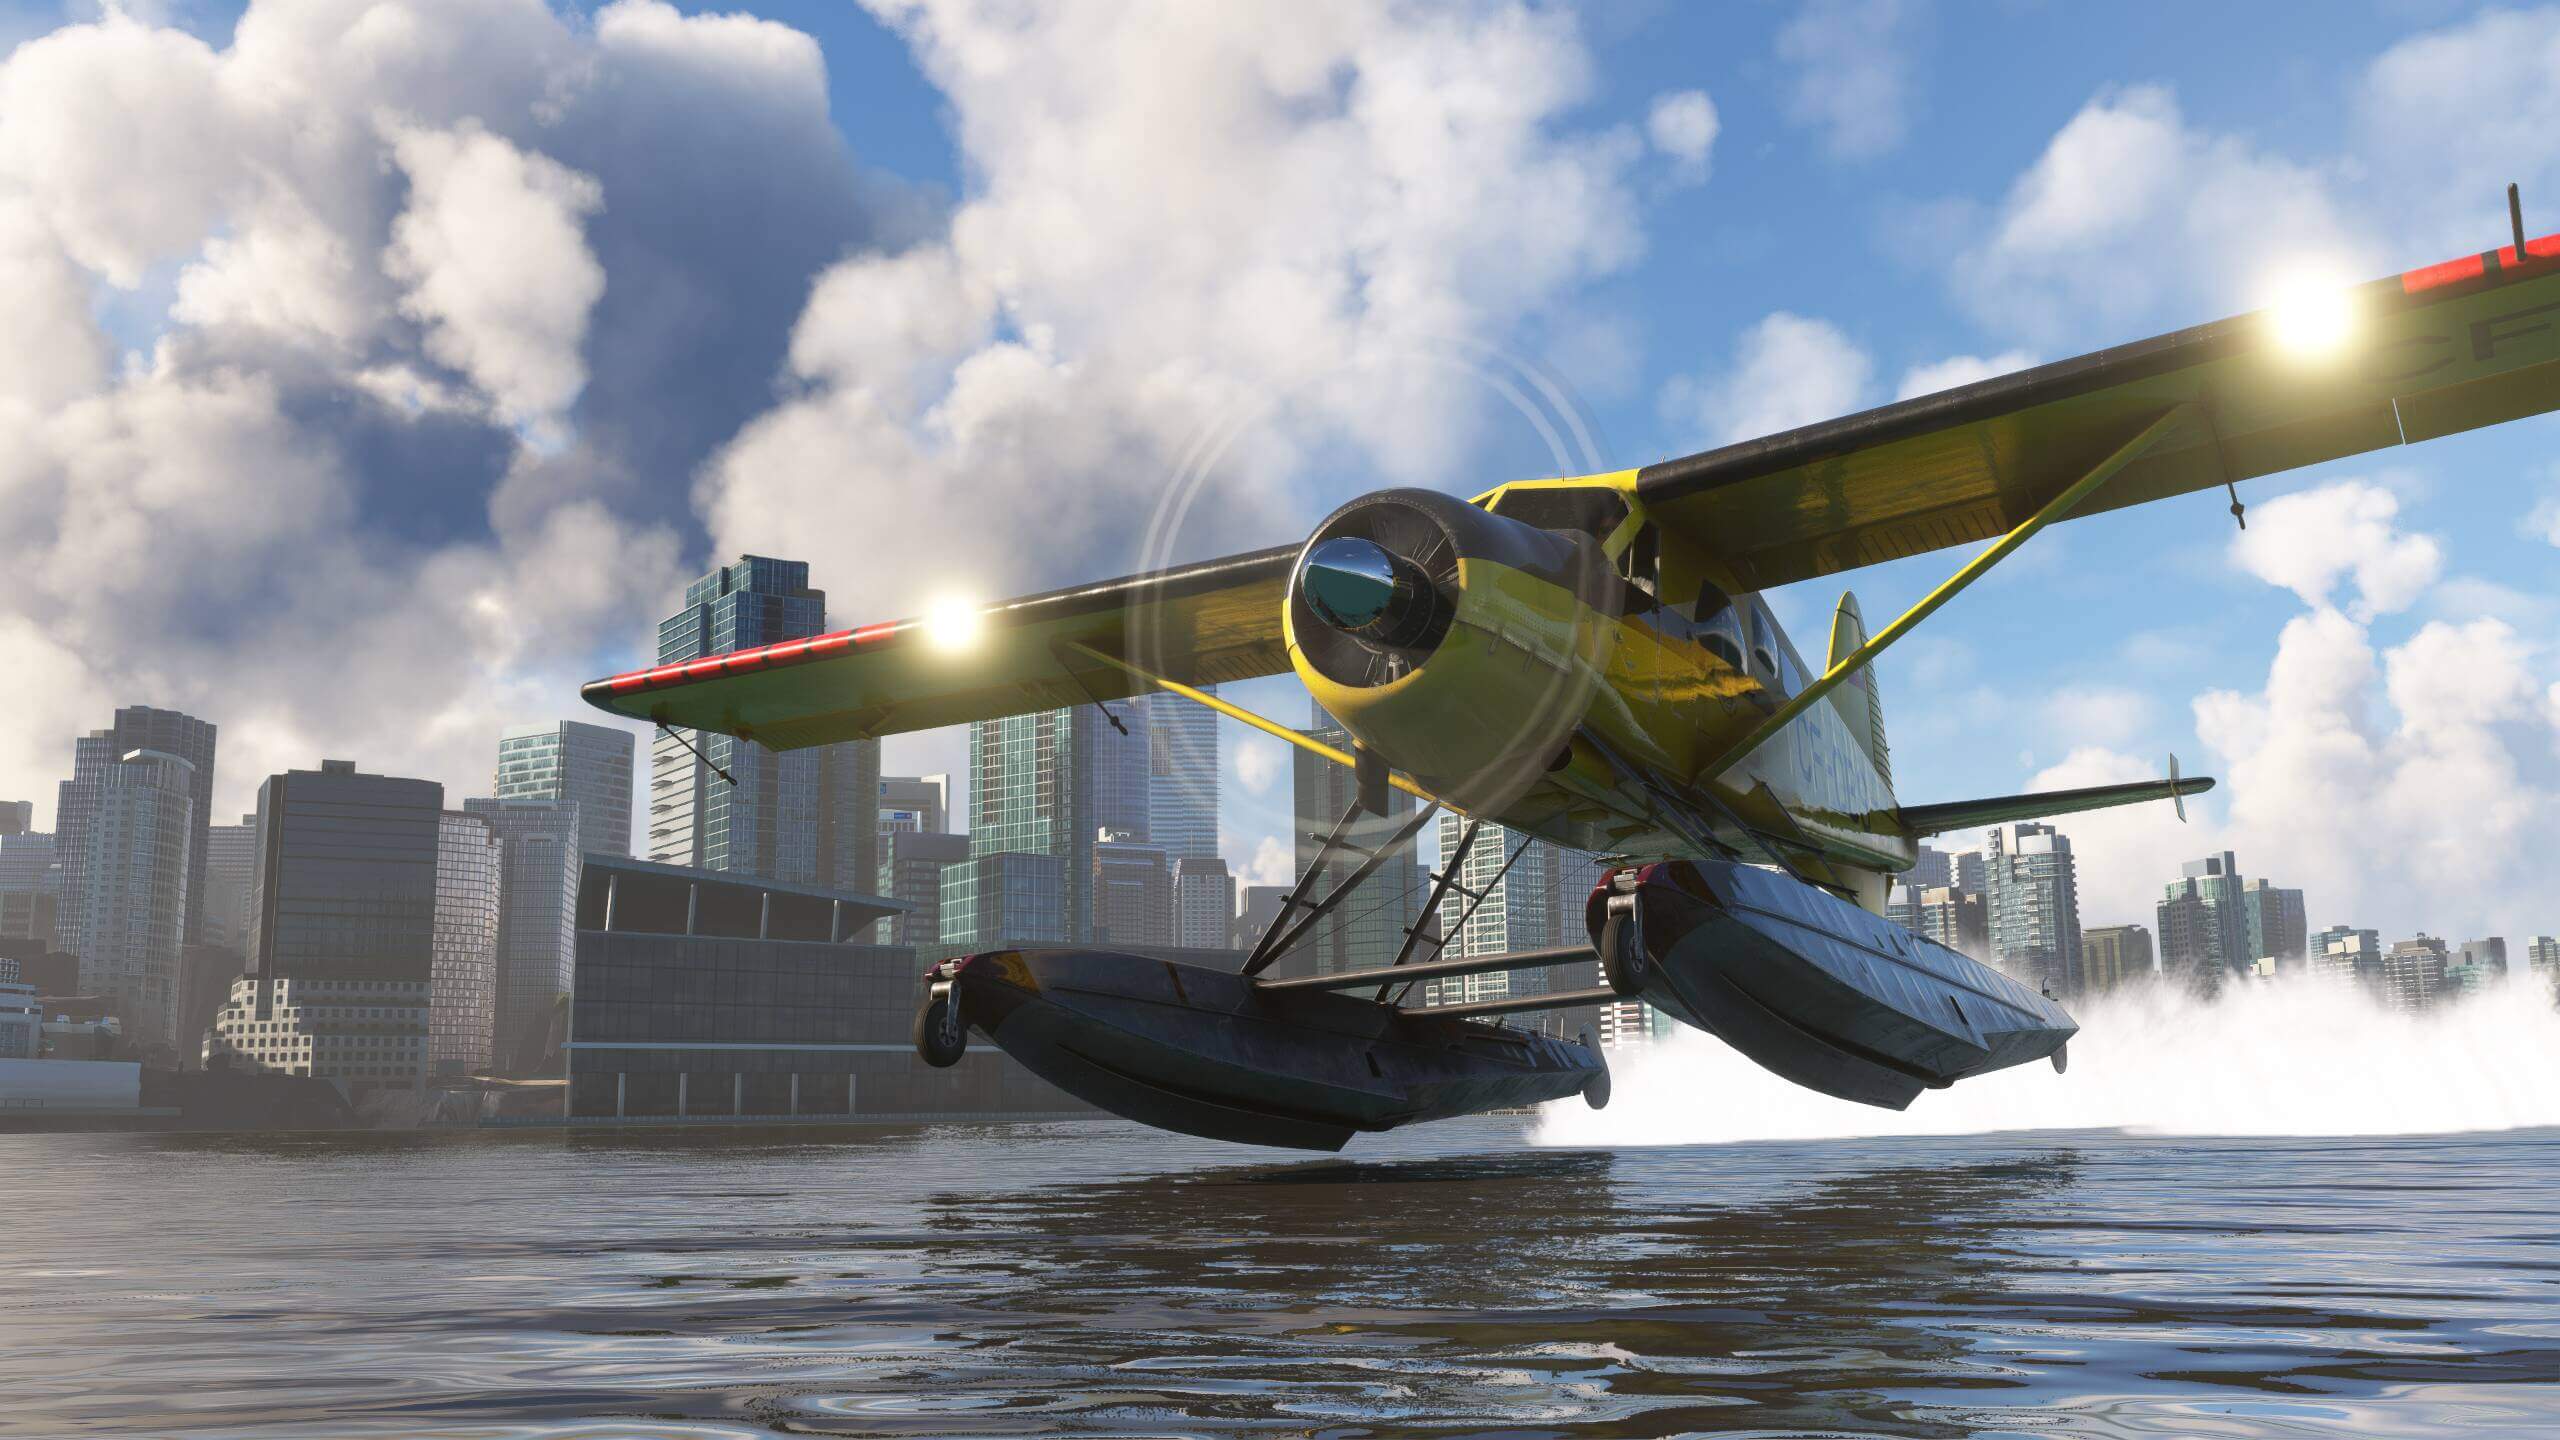 A propeller aircraft with floats sprays water behind as it takes off, with city skyscrapers behind.